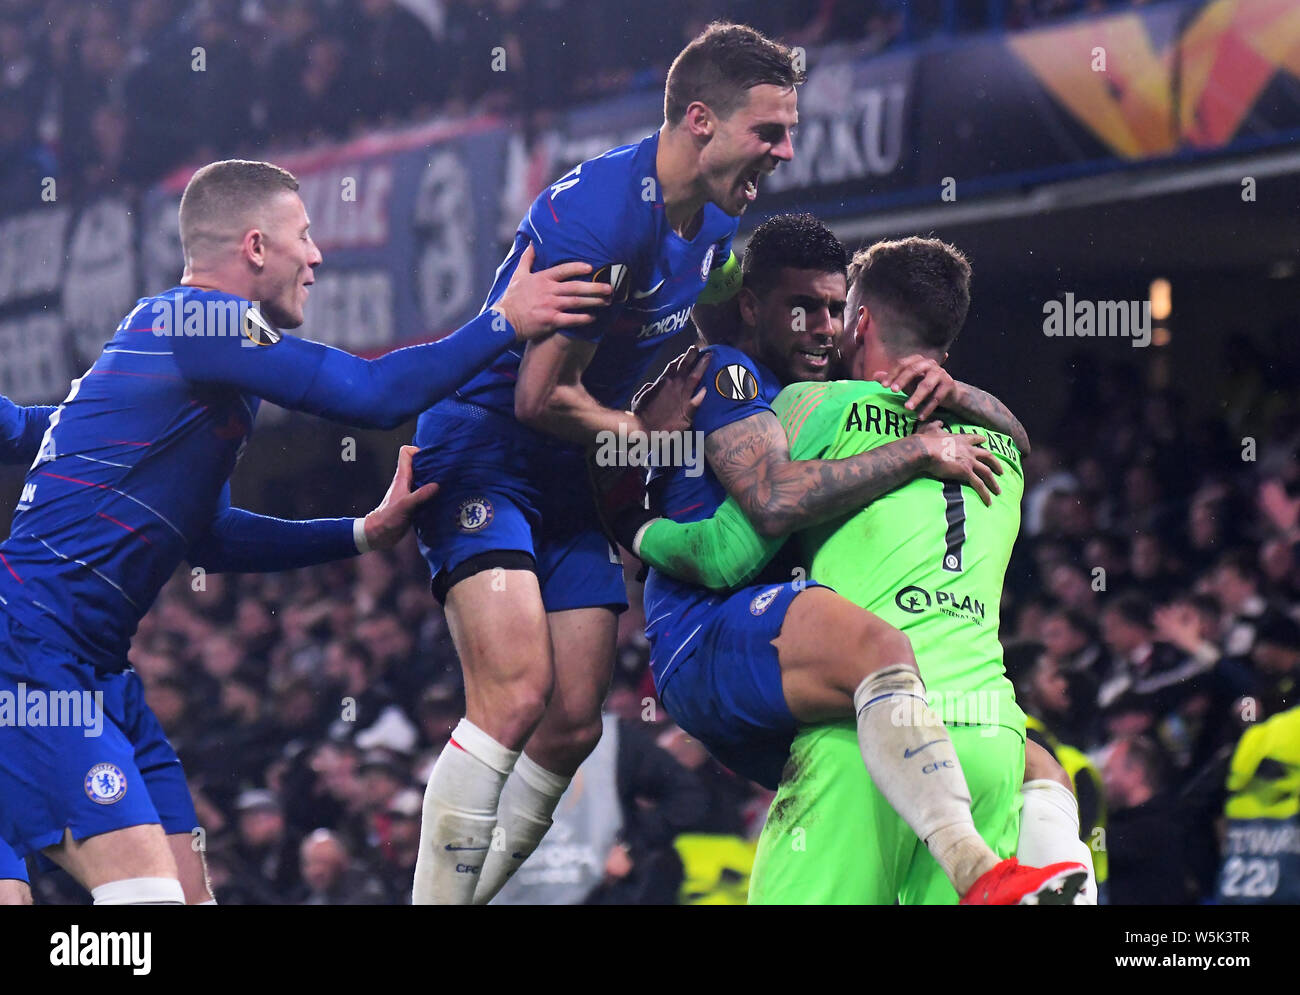 LONDON, ENGLAND - MAY 9, 2019: (From L to R) Ross Barkley of Chelsea, Cesar Azpilicueta of Chelsea, Emerson Palmieri dos Santos of Chelsea and Kepa Arrizabalaga of Chelsea celebrate after the second leg of the 2018/19 UEFA Europa League Semi-Finals game between Chelsea FC (England) and Eintracht Frankfurt e.V. (Germany) at Stamford Bridge. Stock Photo